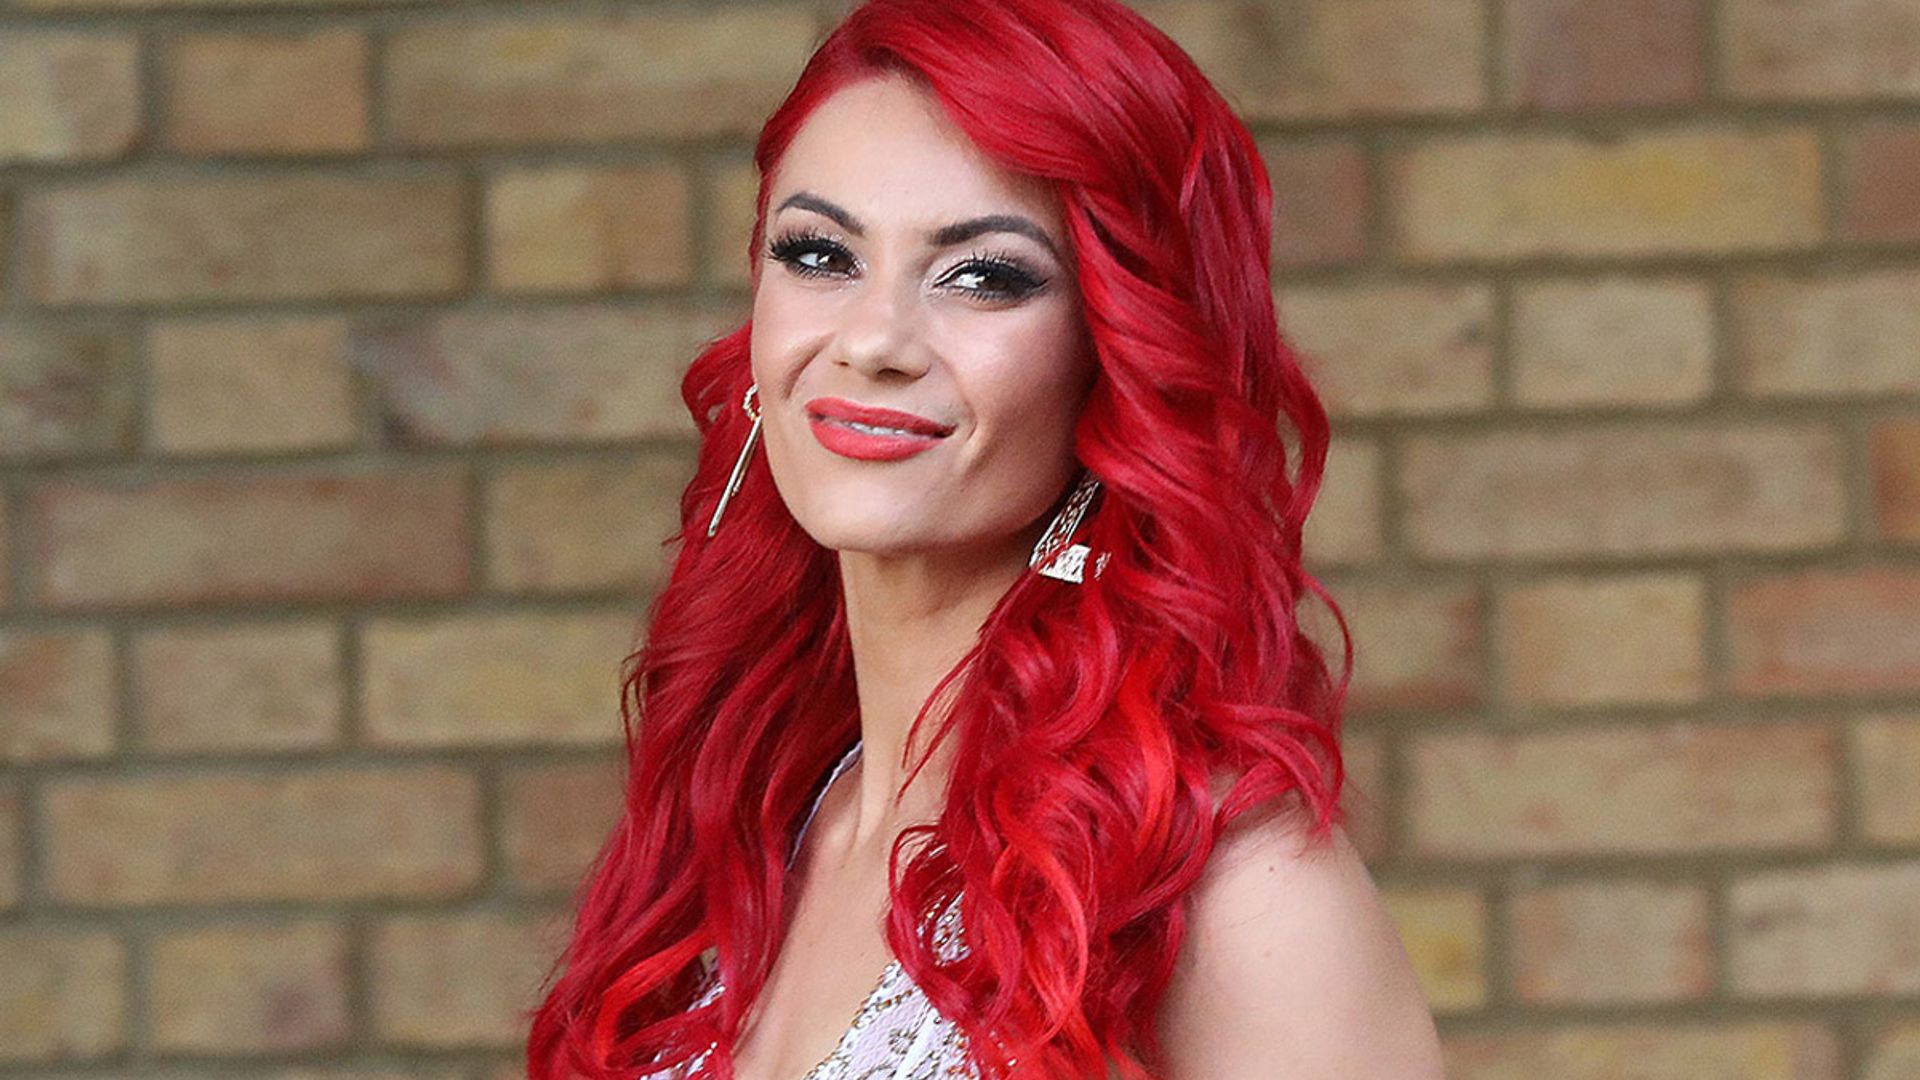 Strictly's Dianne Buswell celebrated secret wedding anniversary days after Australia trip